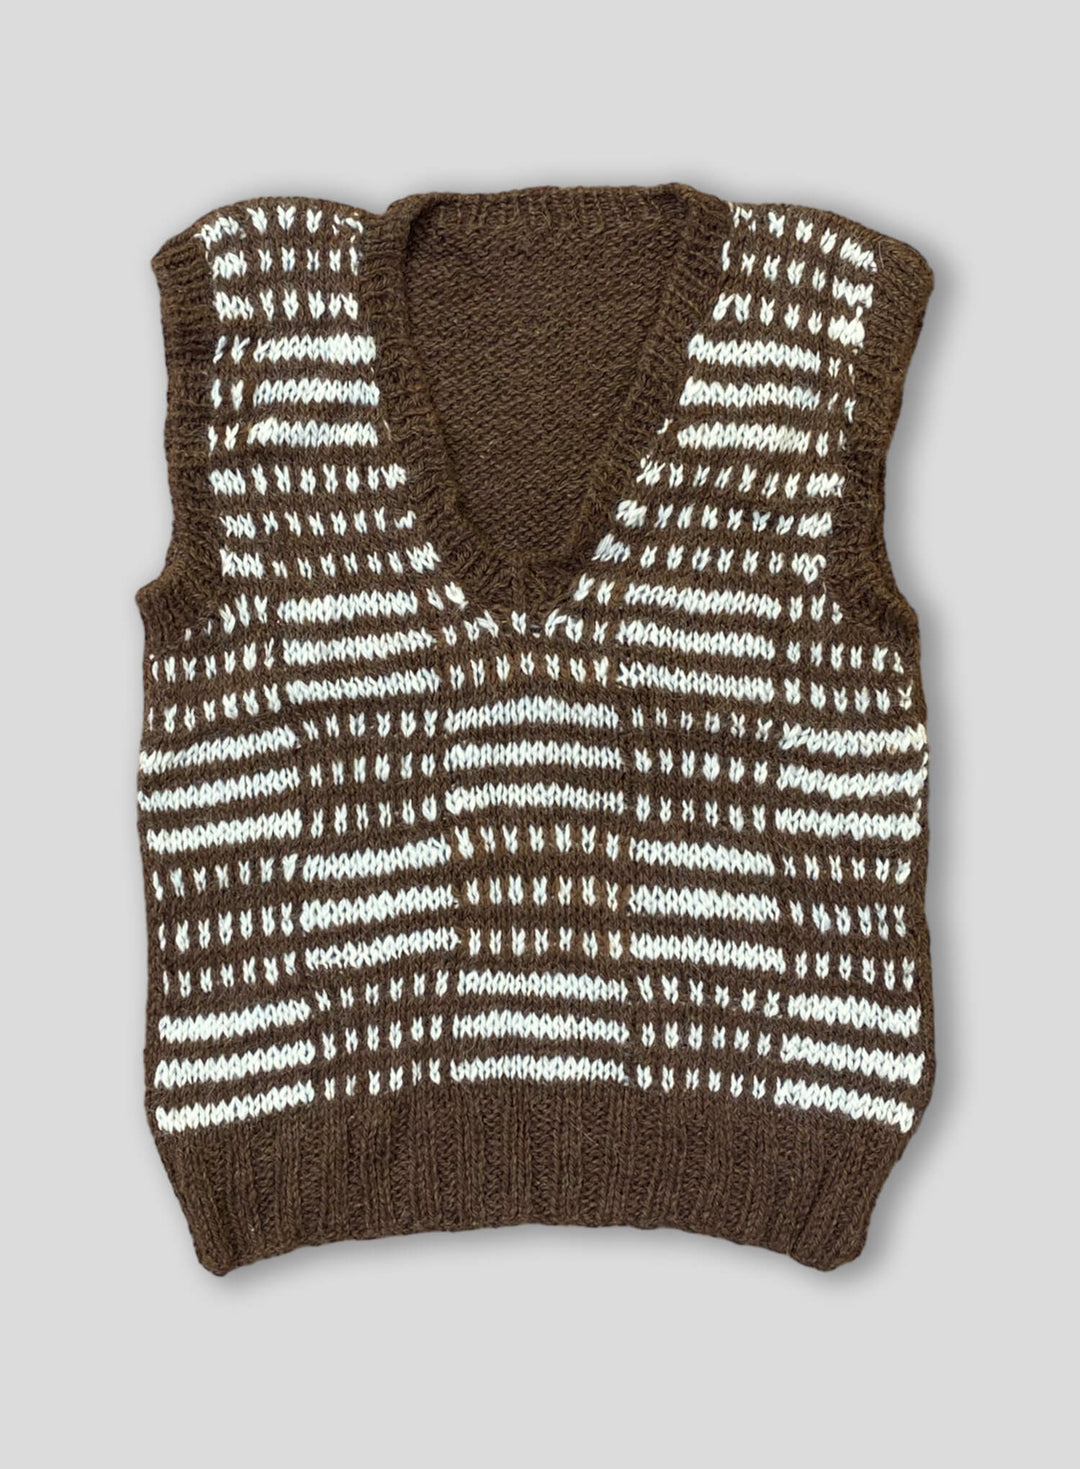 Hand-Knitted Llama Sweater Vest